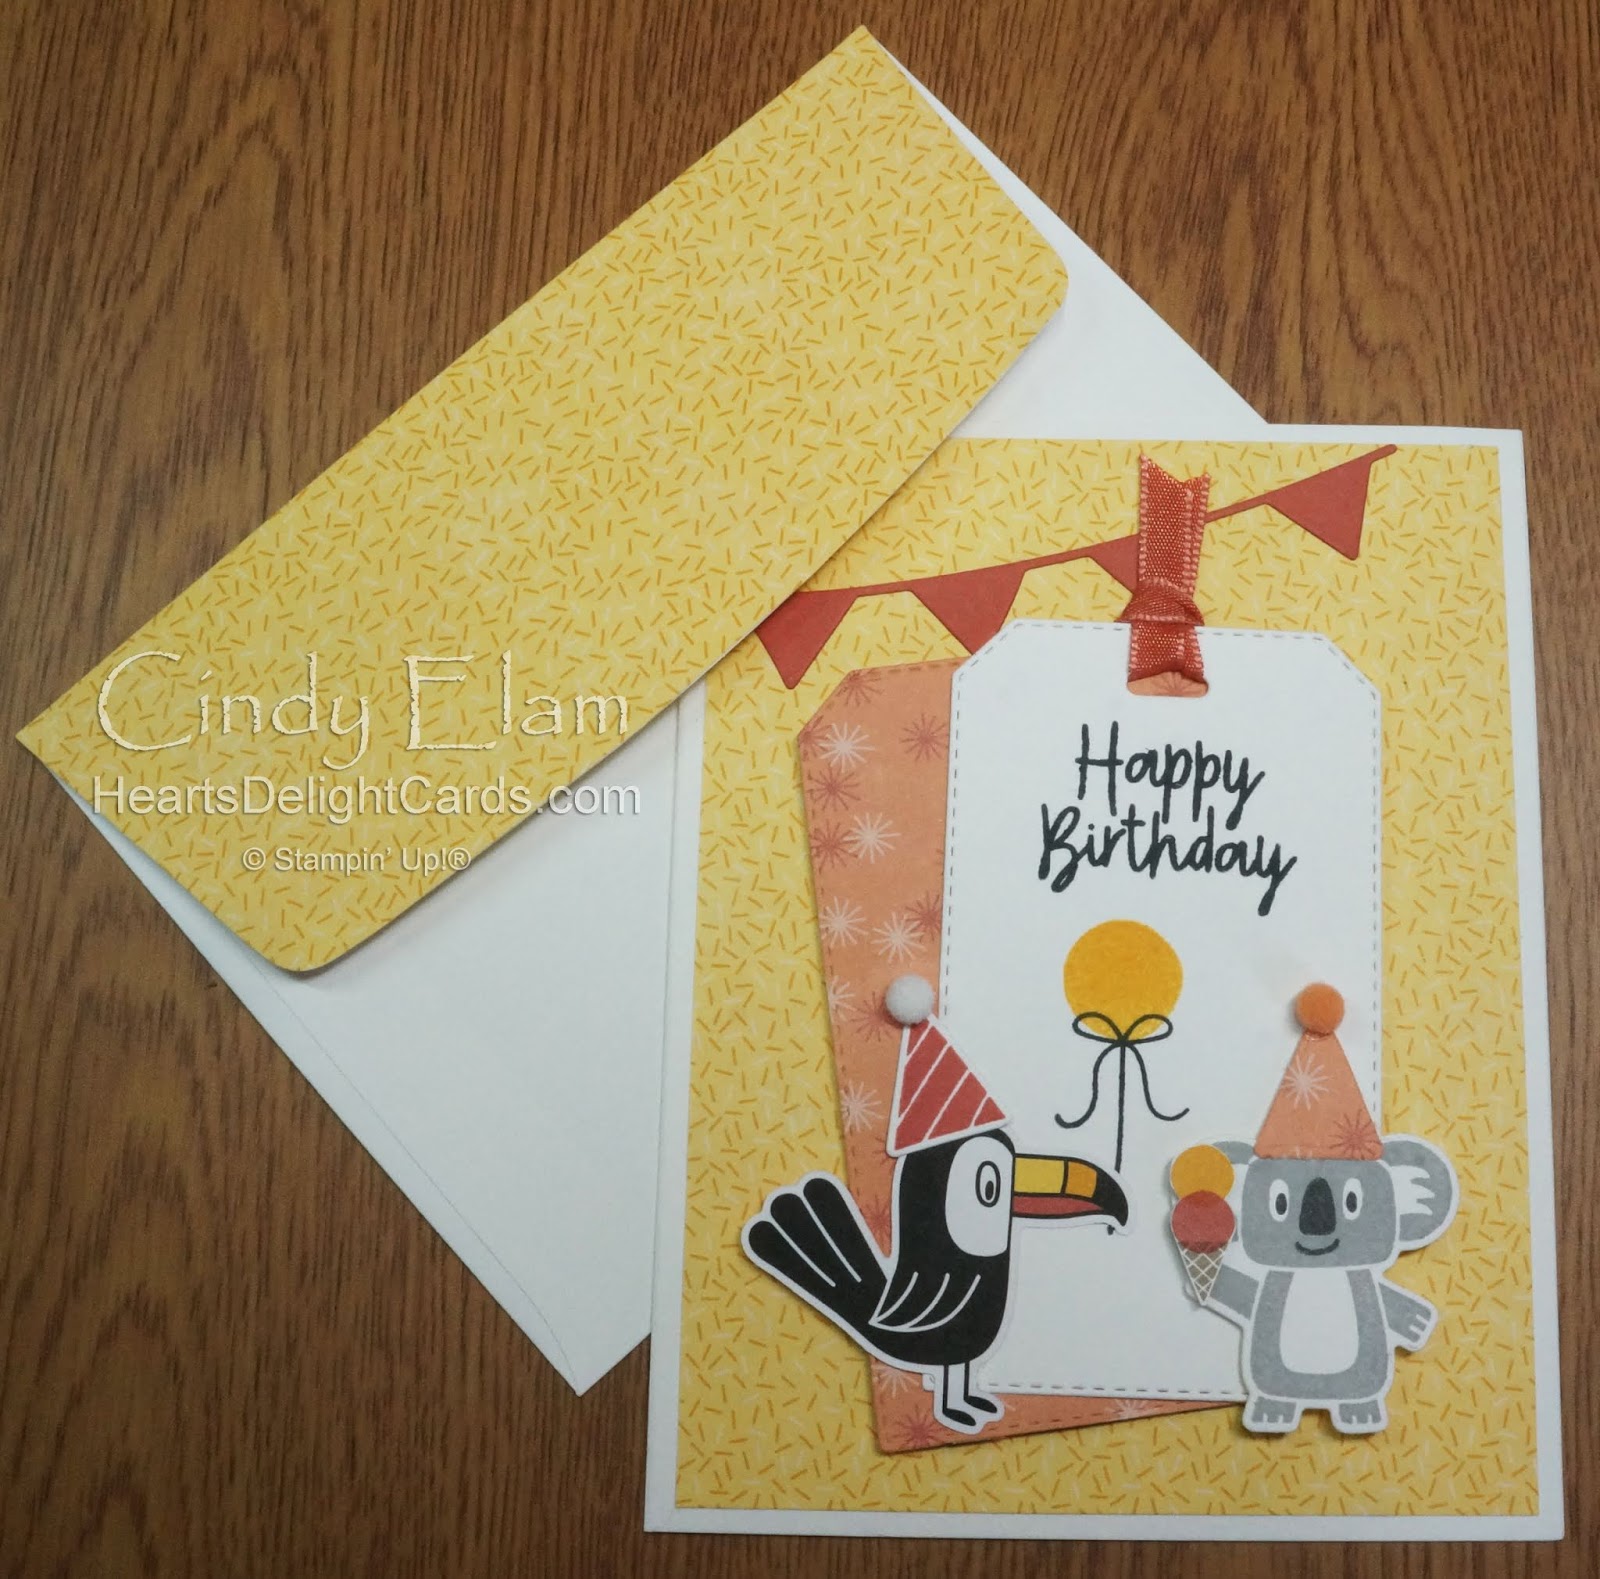 Heart's Delight Cards: The Stamp Review Crew - Bonanza Buddies